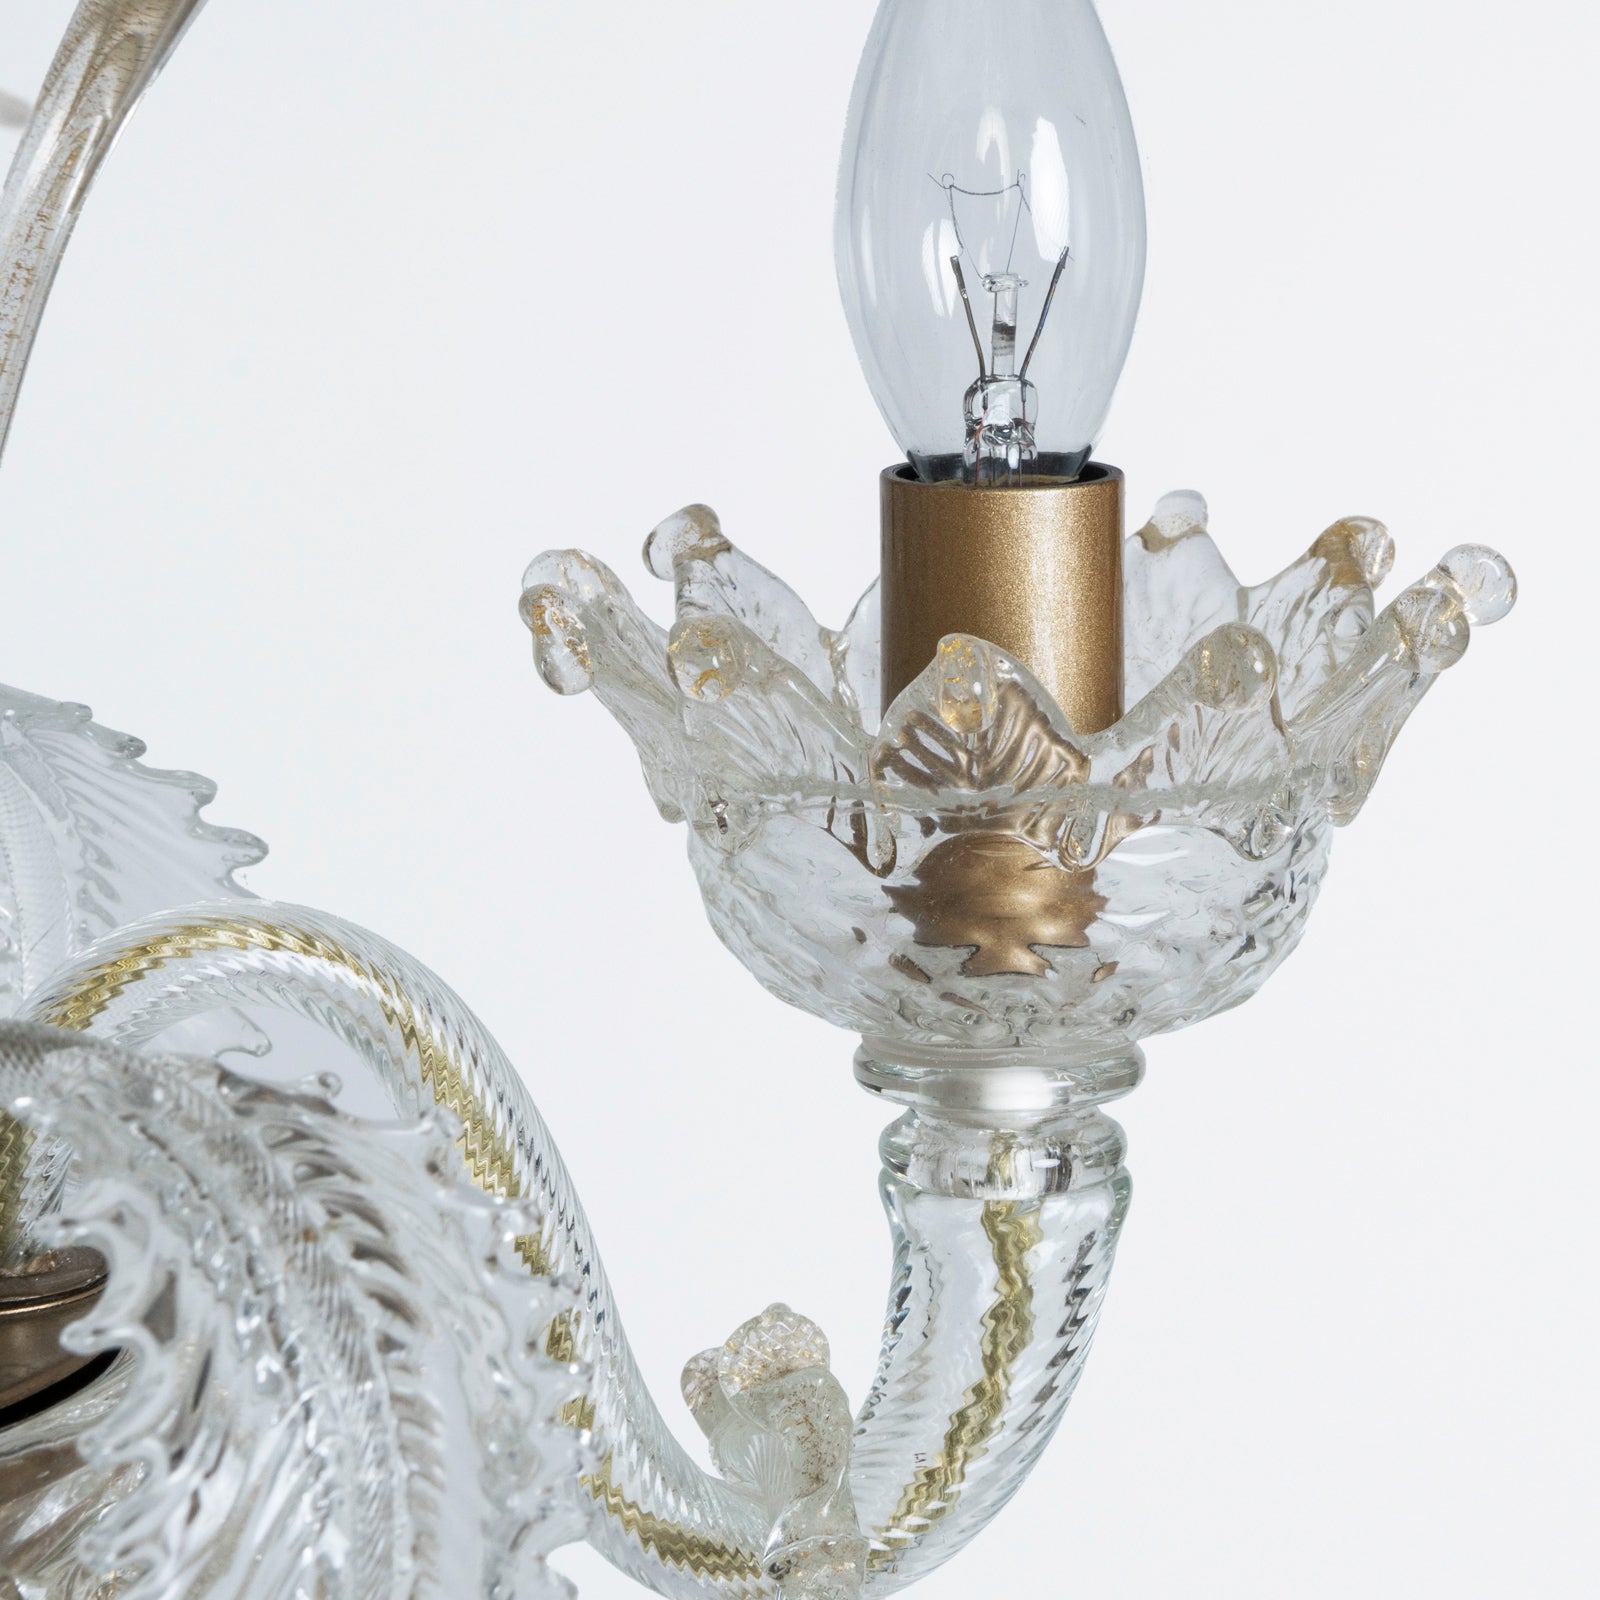 Small Venetian Hand Blown White and 14K Gold Chandelier